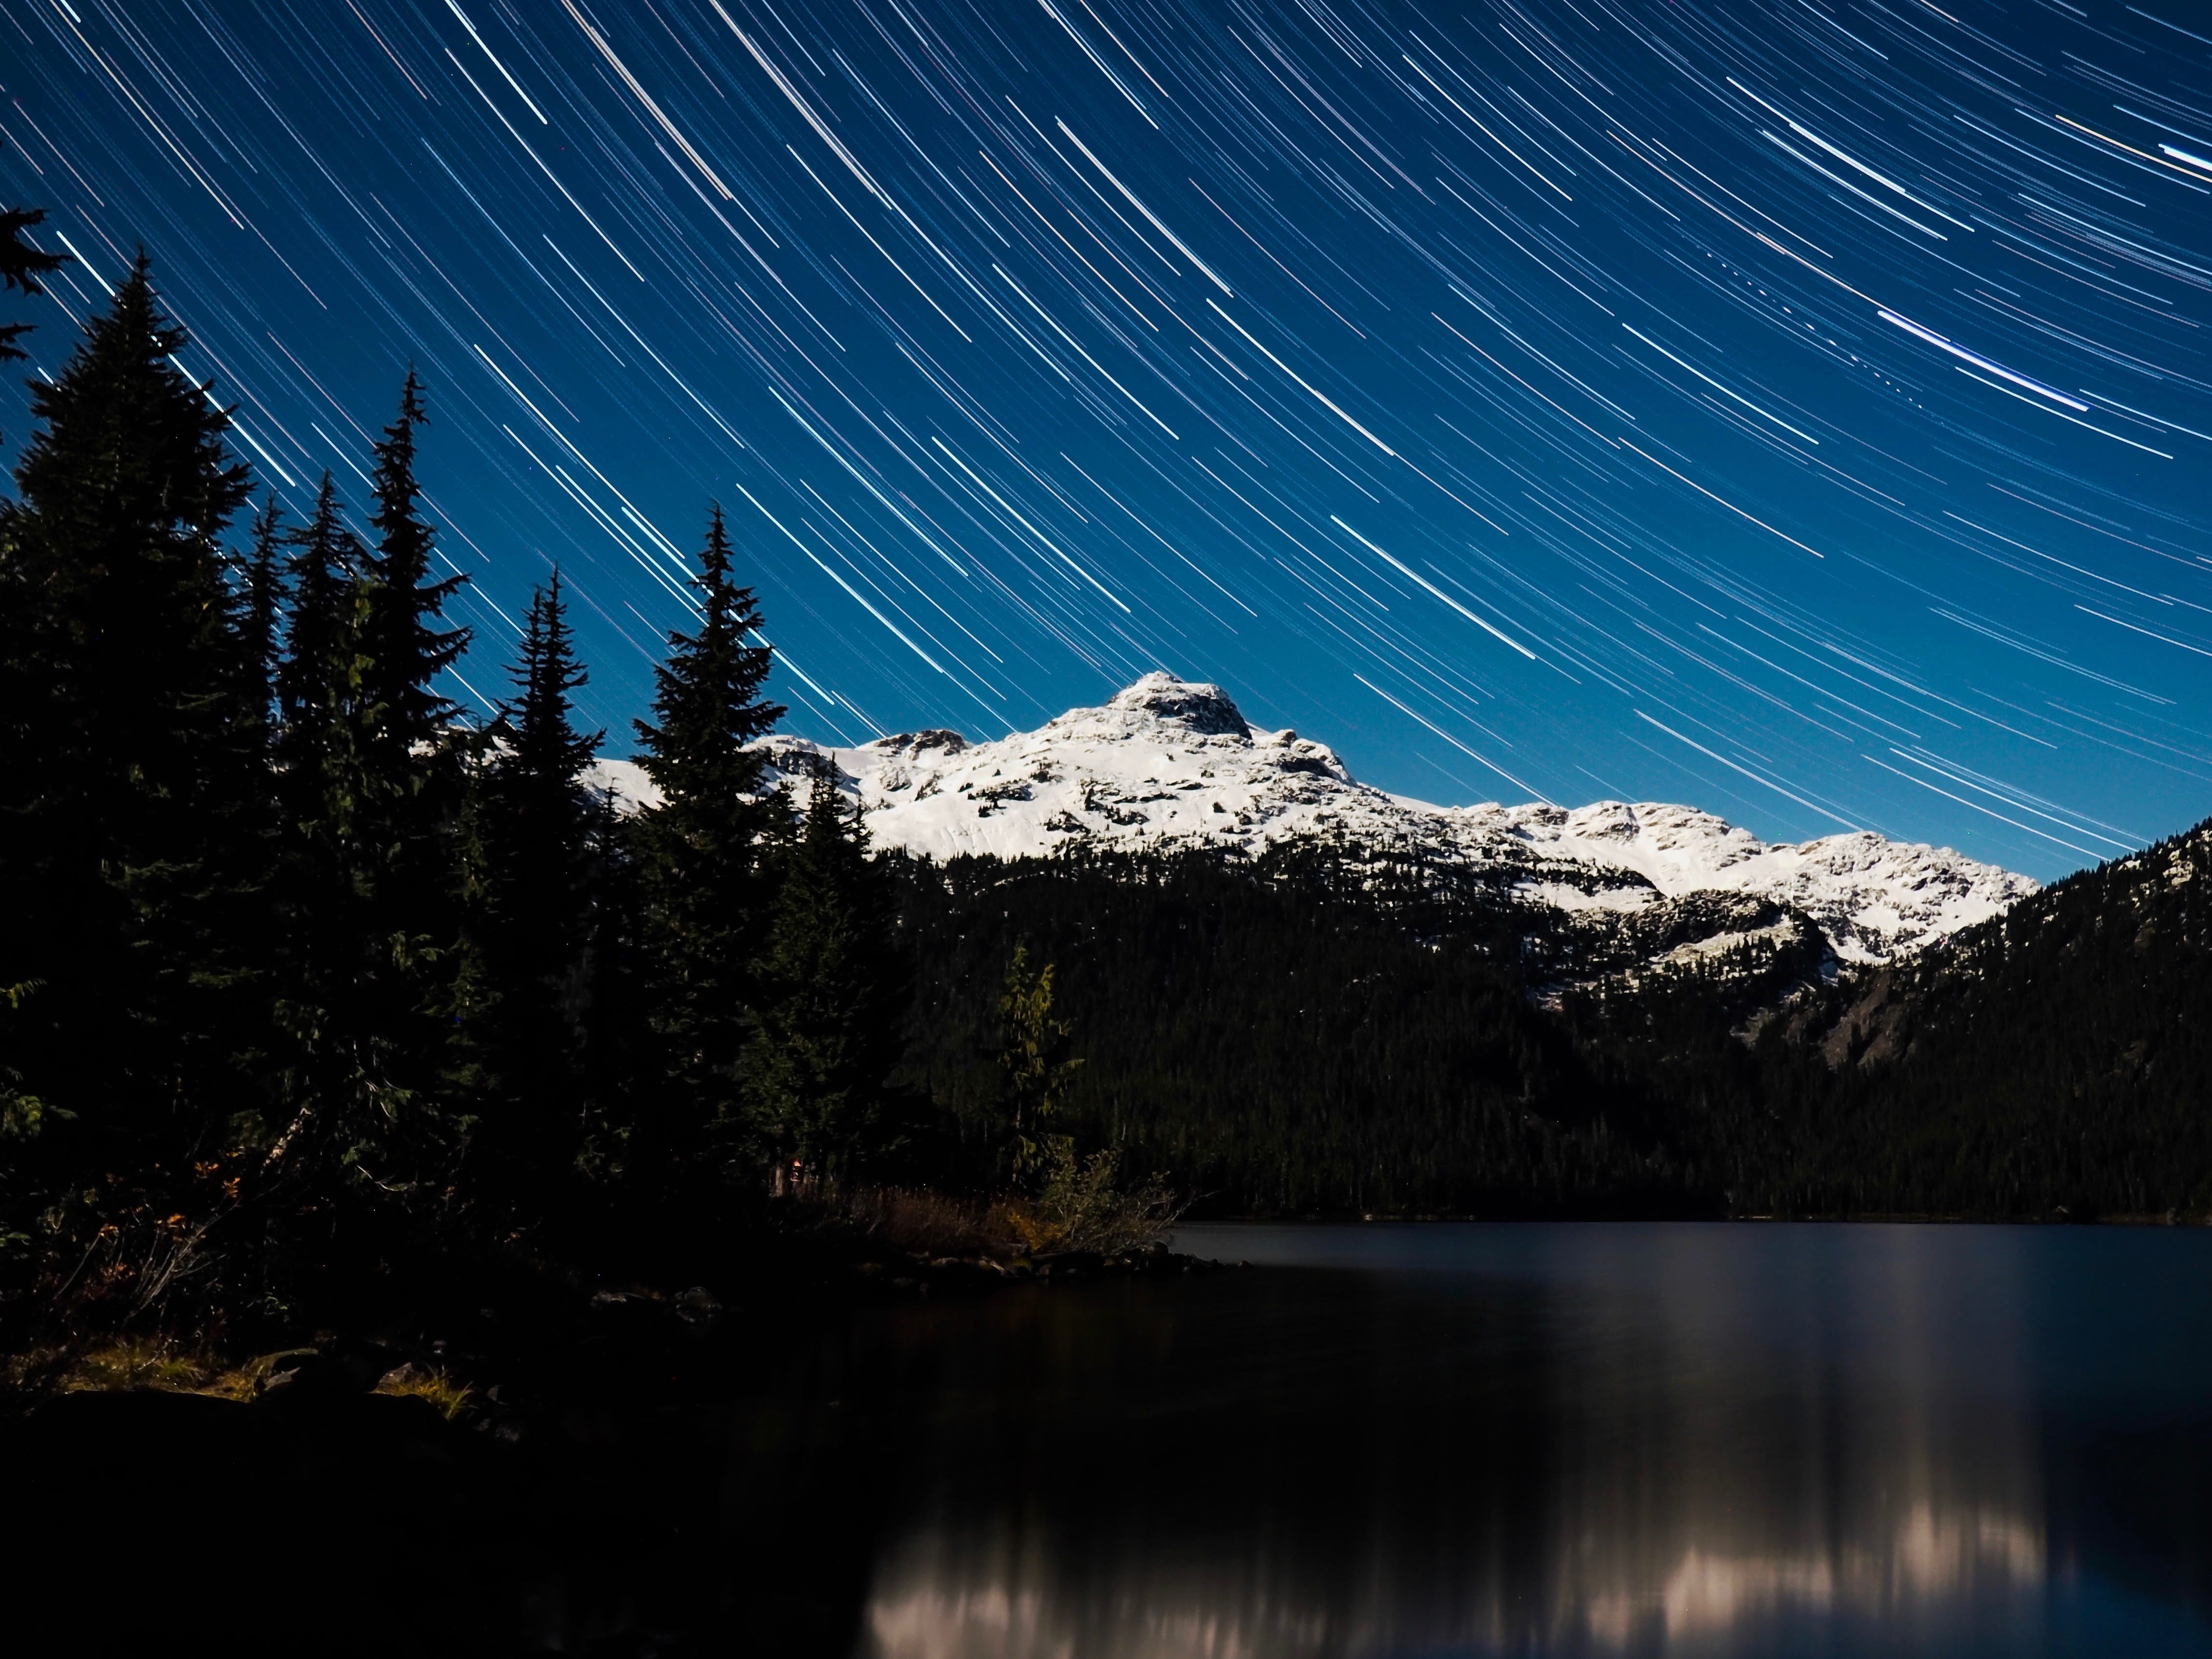 Learning to shoot star trails